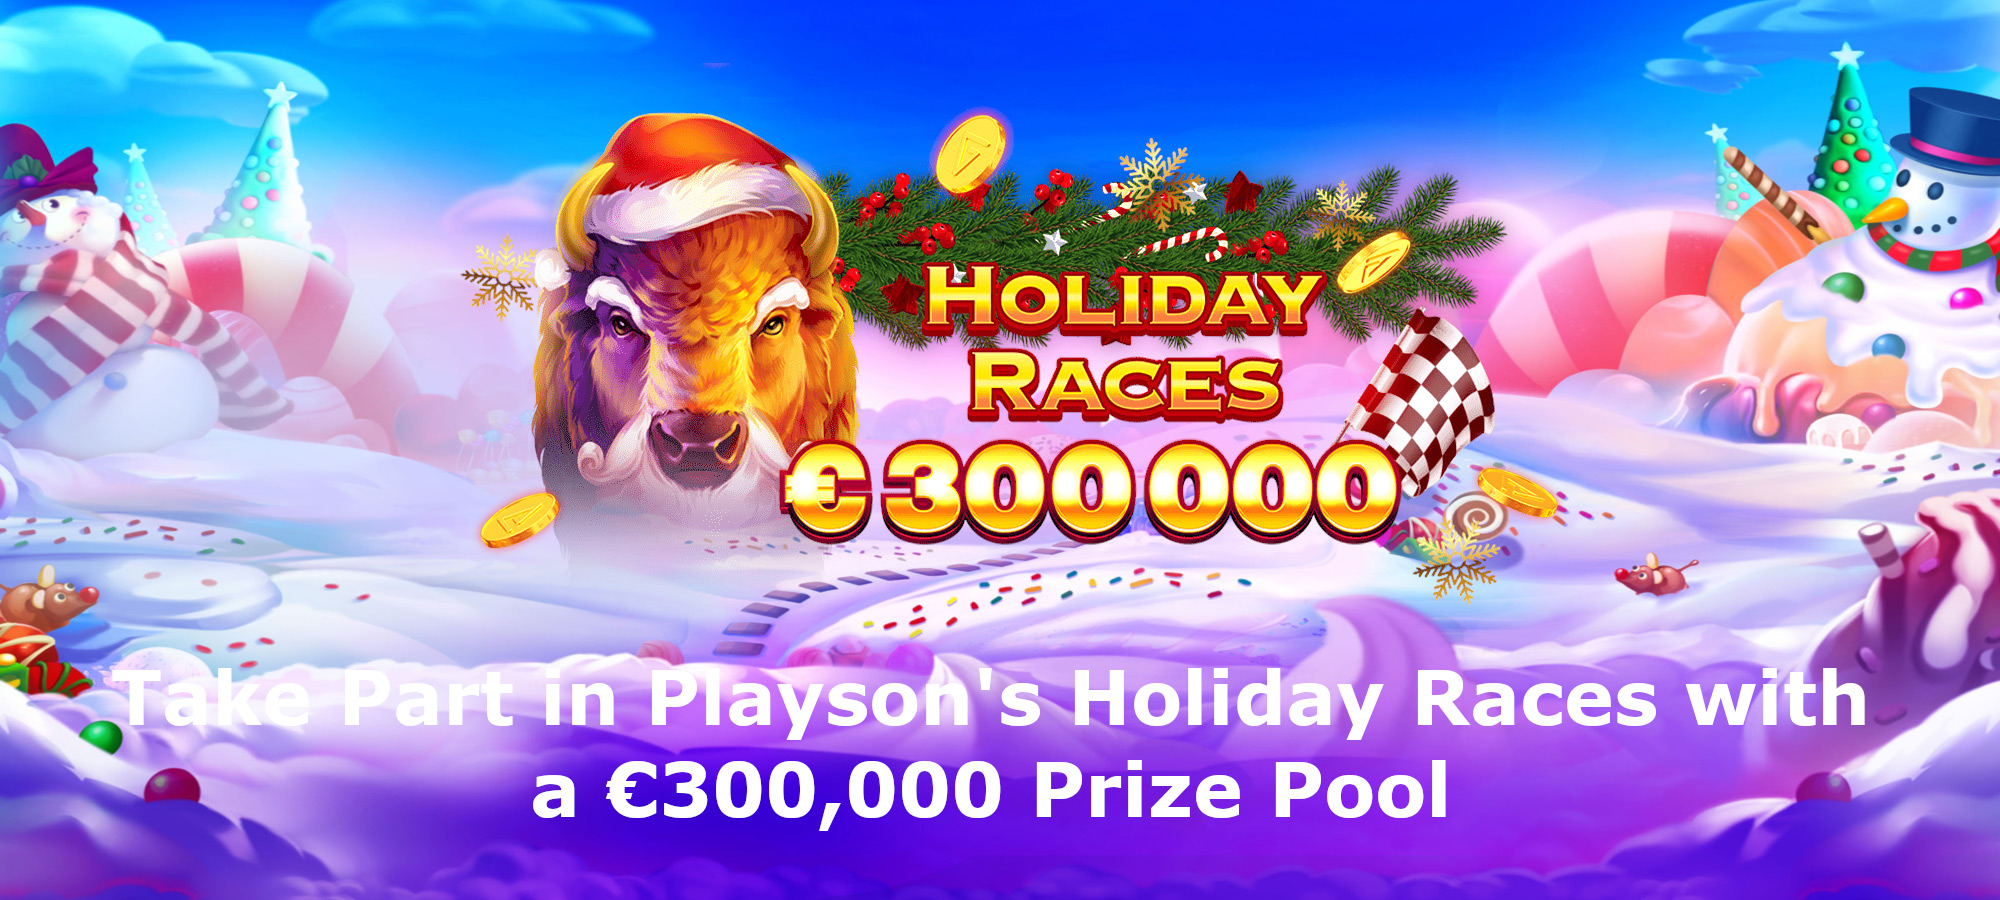 Take Part in Playson’s Holiday Races with a €300,000 Prize Pool